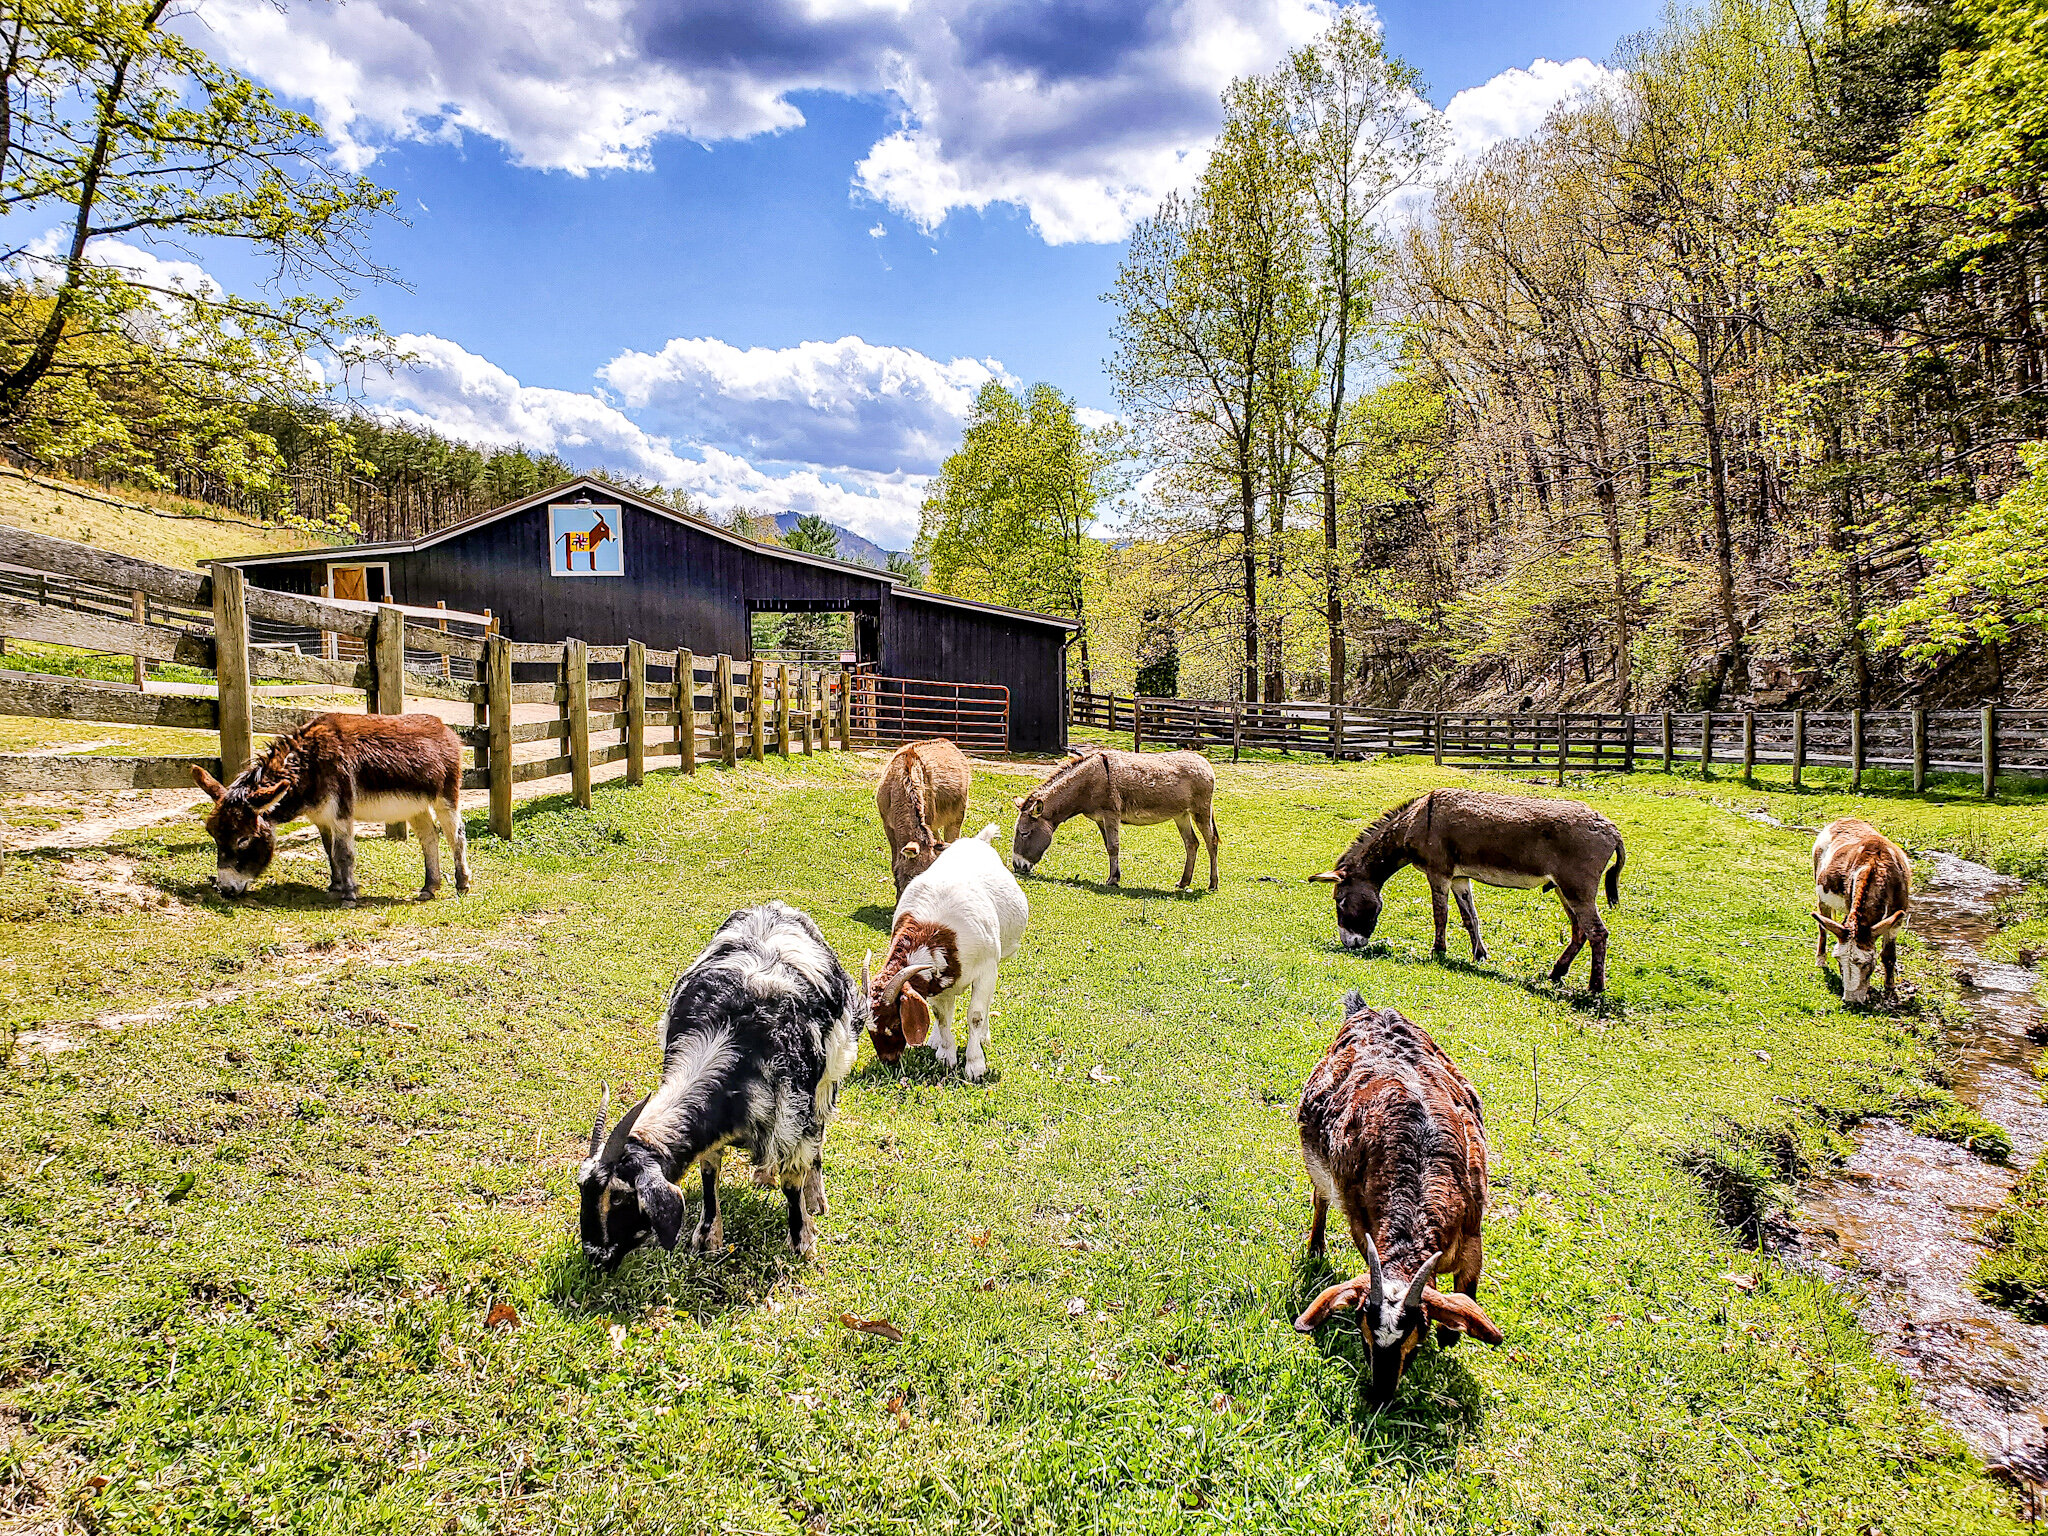 Some of the herd at Little Mountain Ark Farm